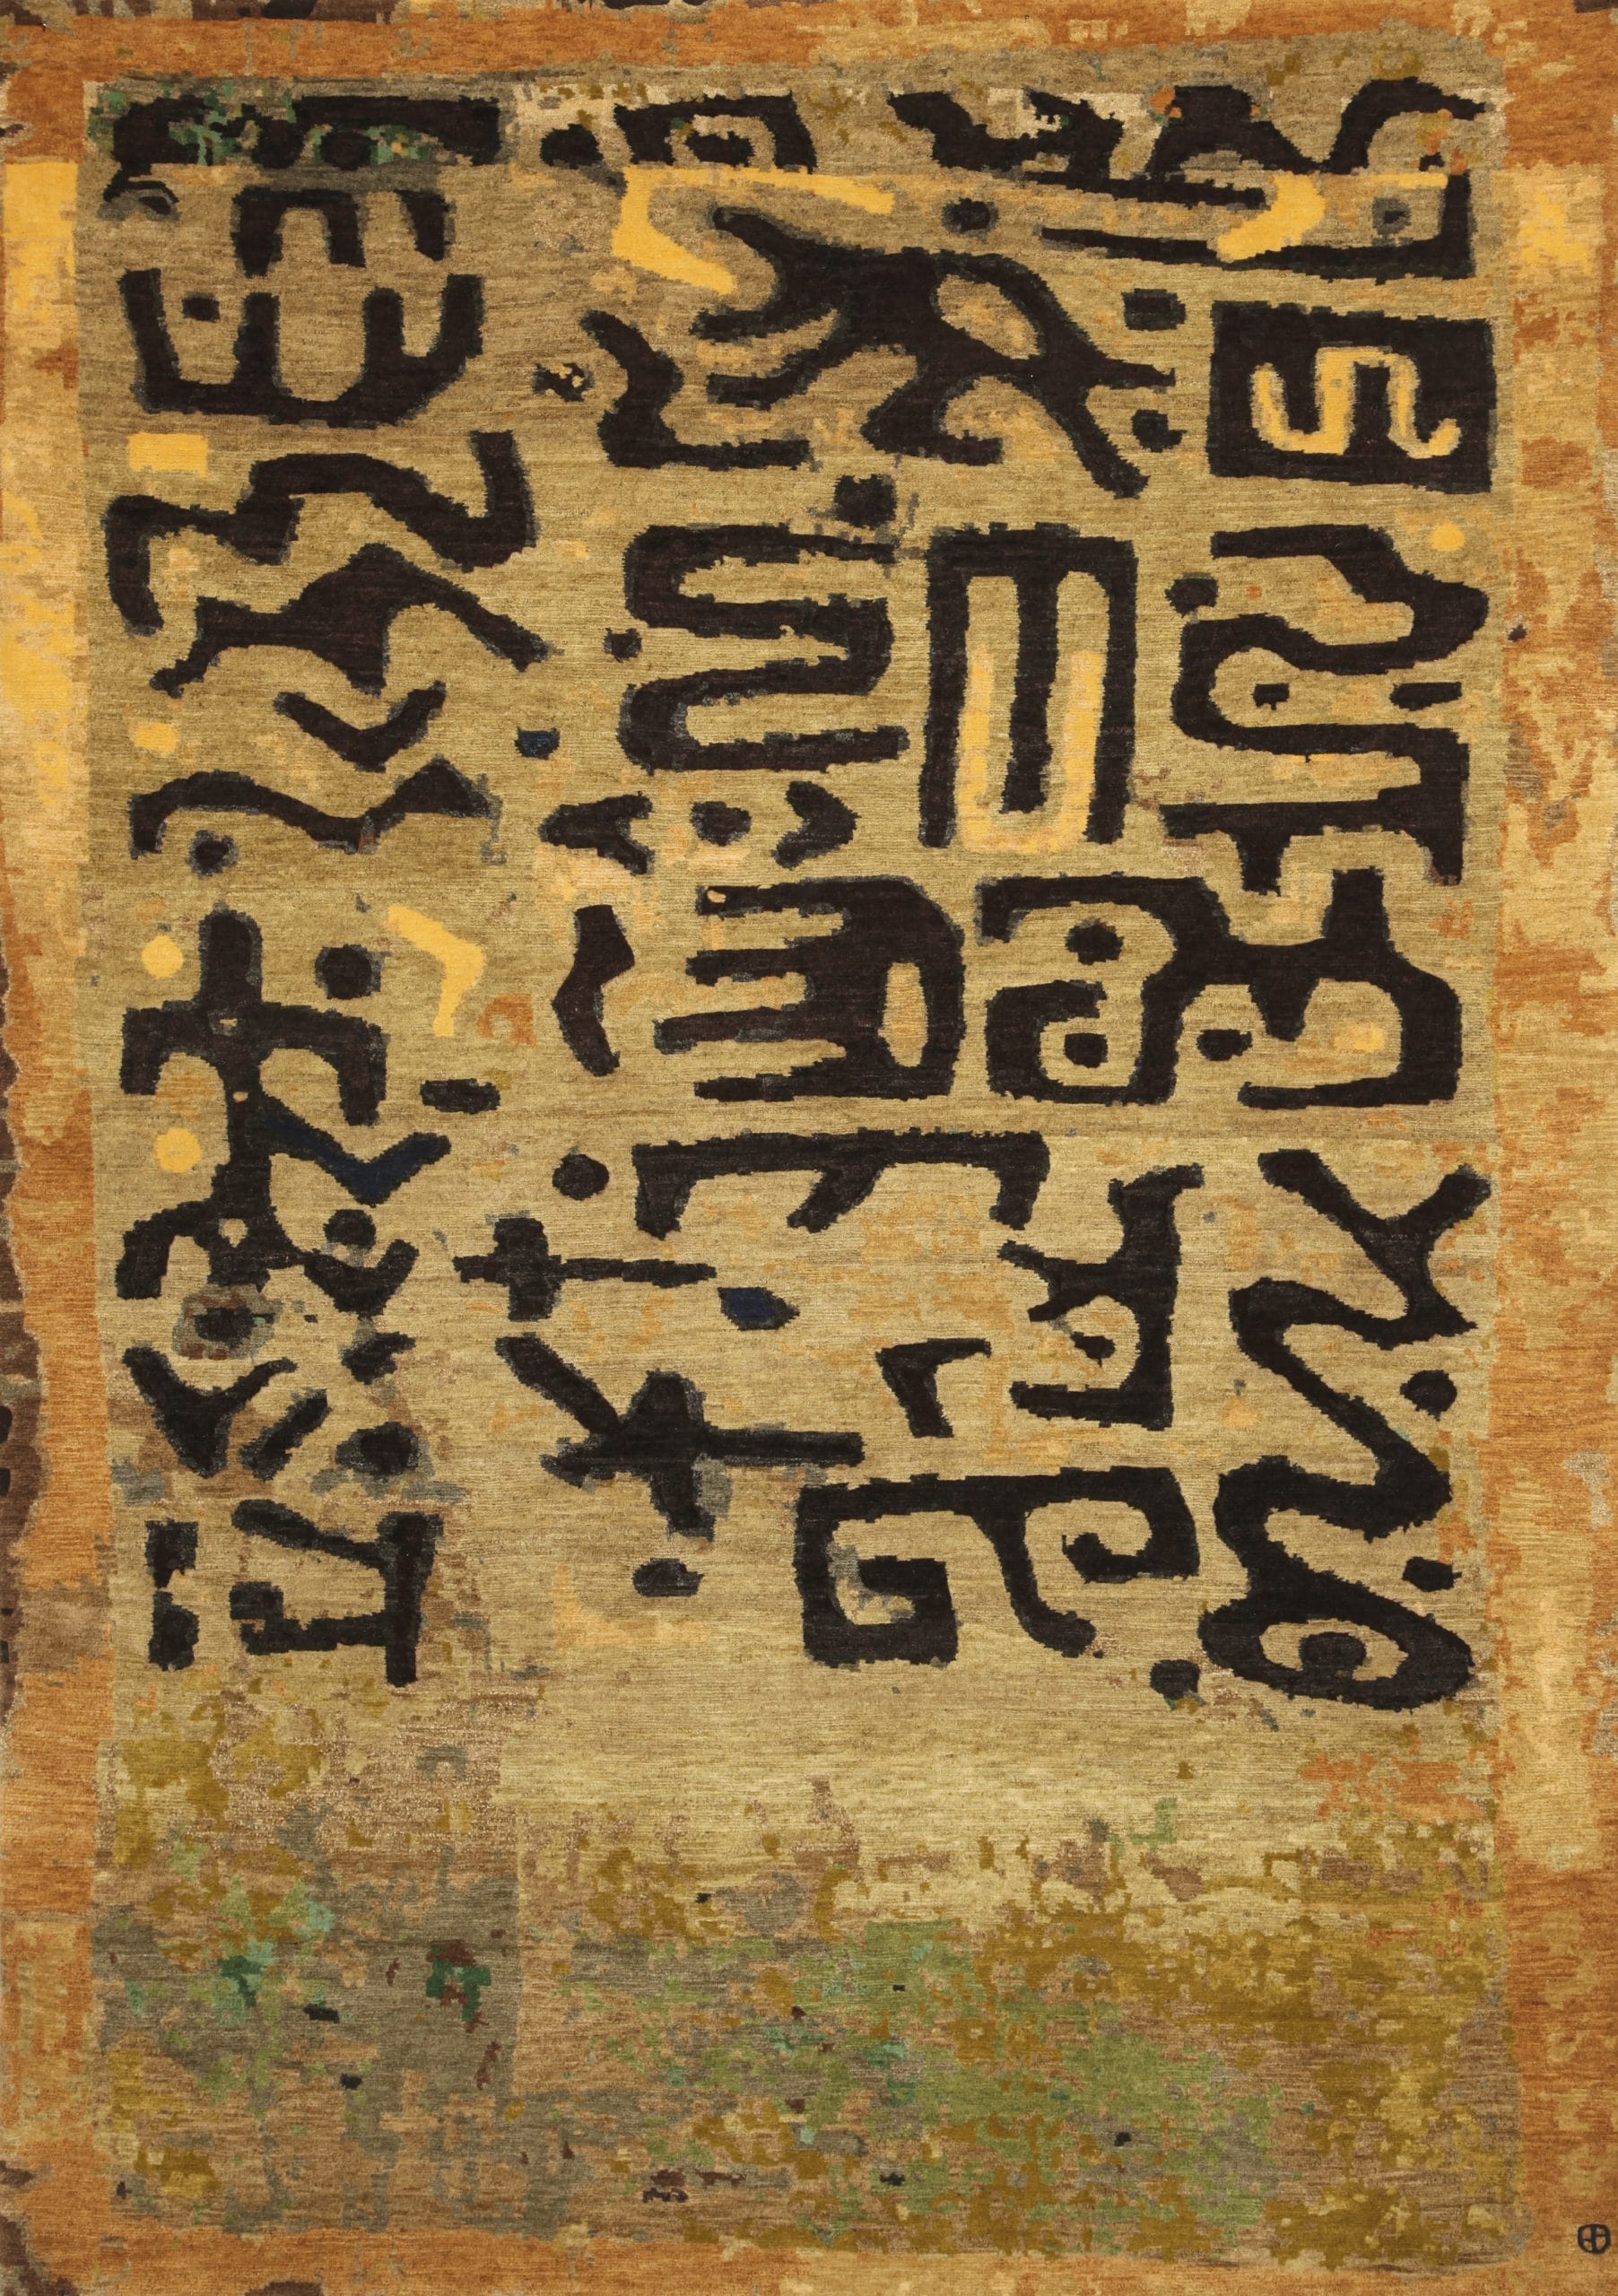 Geba carpet "Kuba" in beige and green details, big black writing in the middle, from Nepal, 100 knot, 100% sheep's wool - product picture - Geba carpet